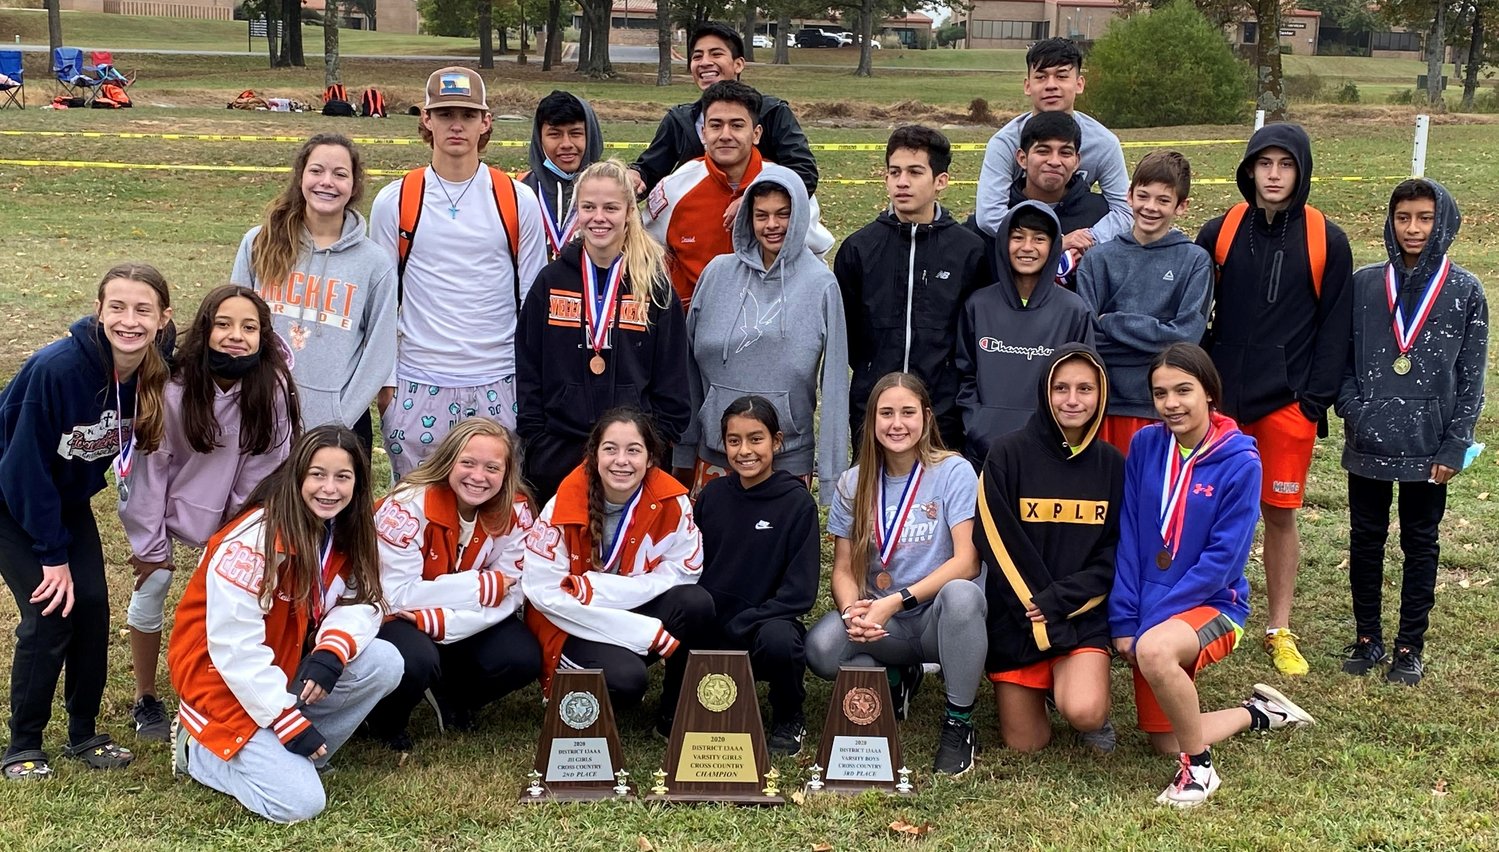 The Mineola girls varsity, boys varsity and girls junior high cross country teams pose with their trophies after placing first, third and second respectively at the district meet last Saturday. (Photo courtesy of TaShara Everett)